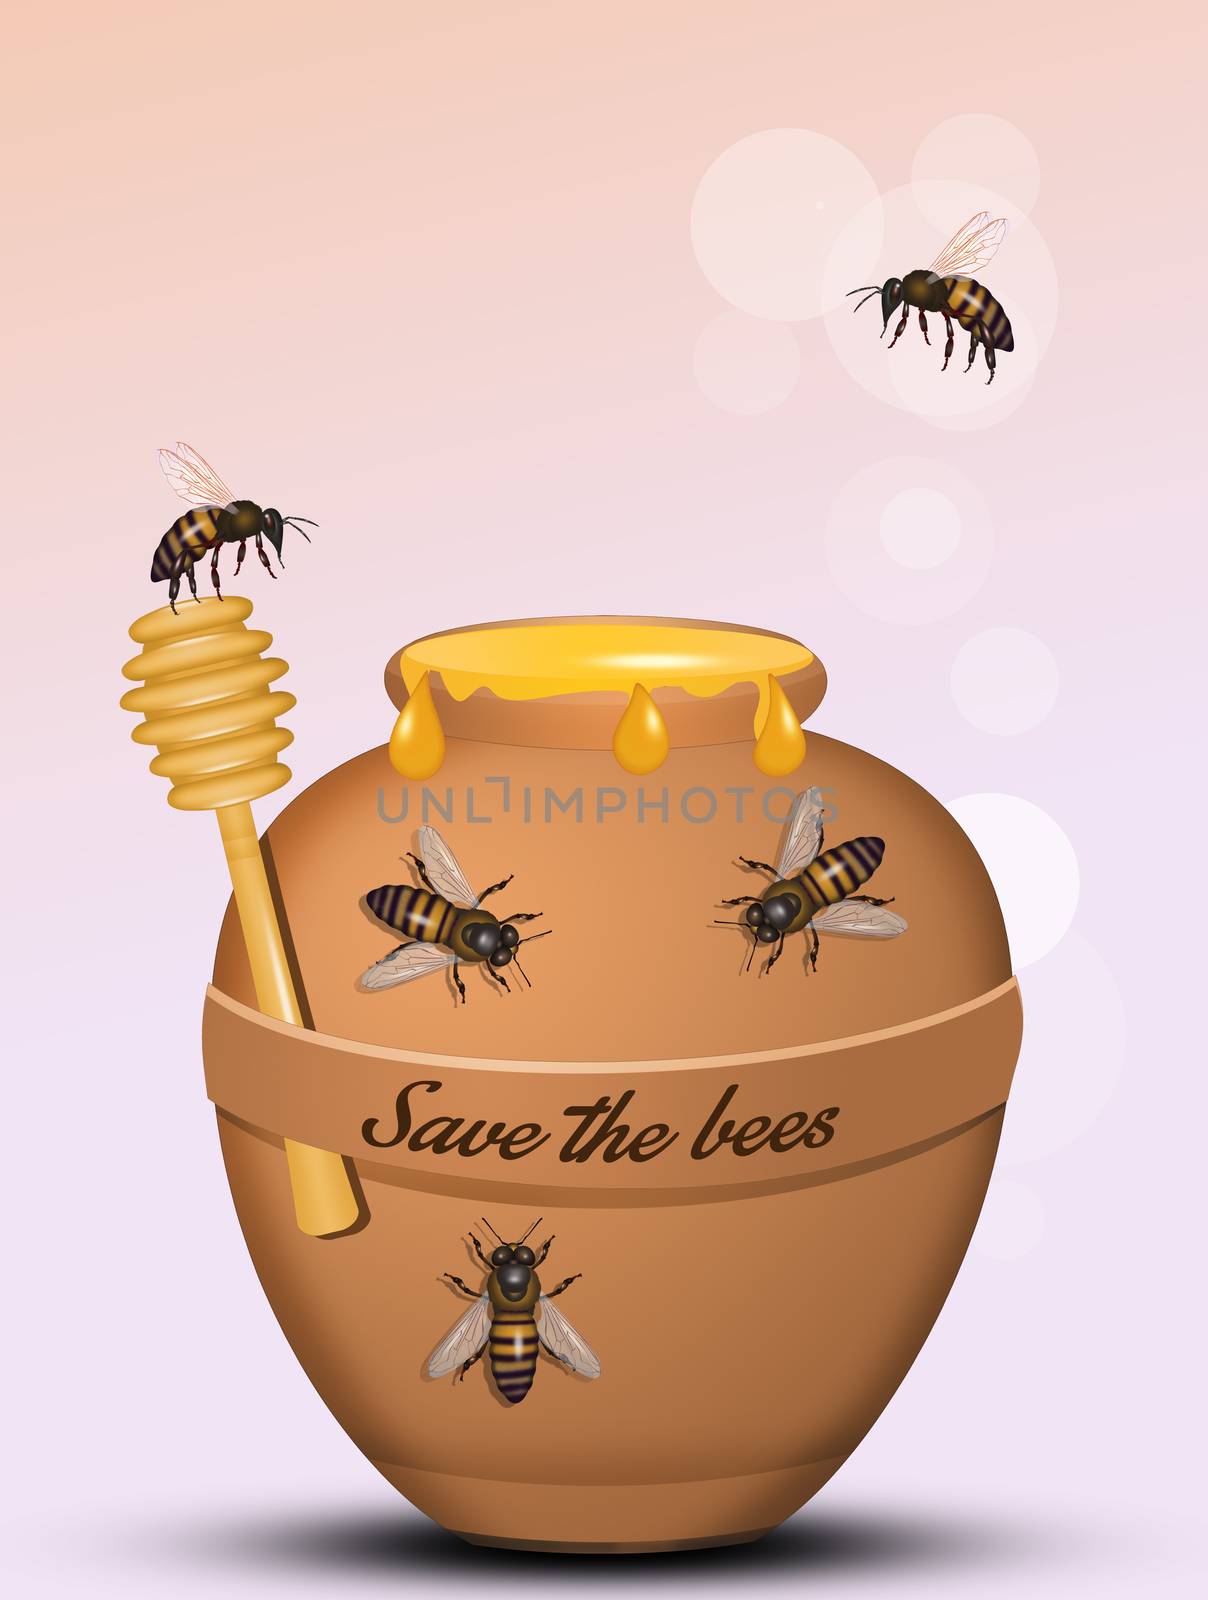 save the bees from the planet by adrenalina